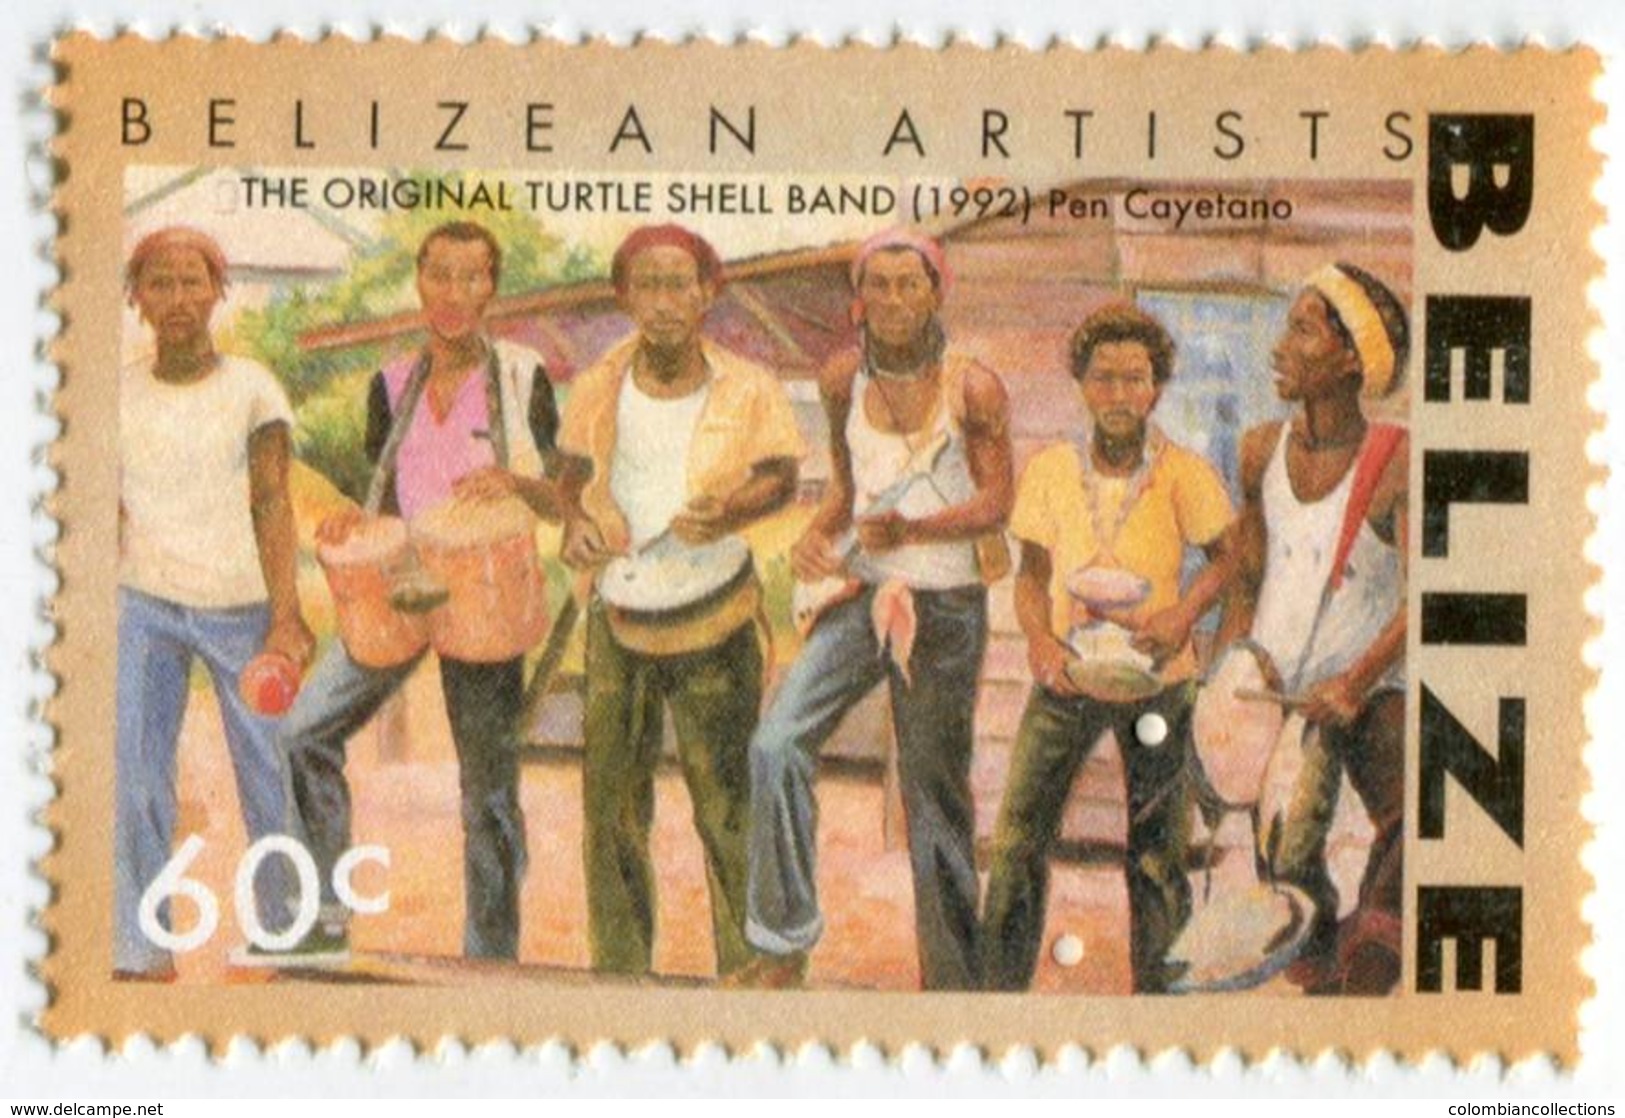 Lote Be6, Belize, 2007, Sello, Stamp, 6 V, Belizean Artists, Art, Music, Flag, Water Fall, Woman - Belize (1973-...)